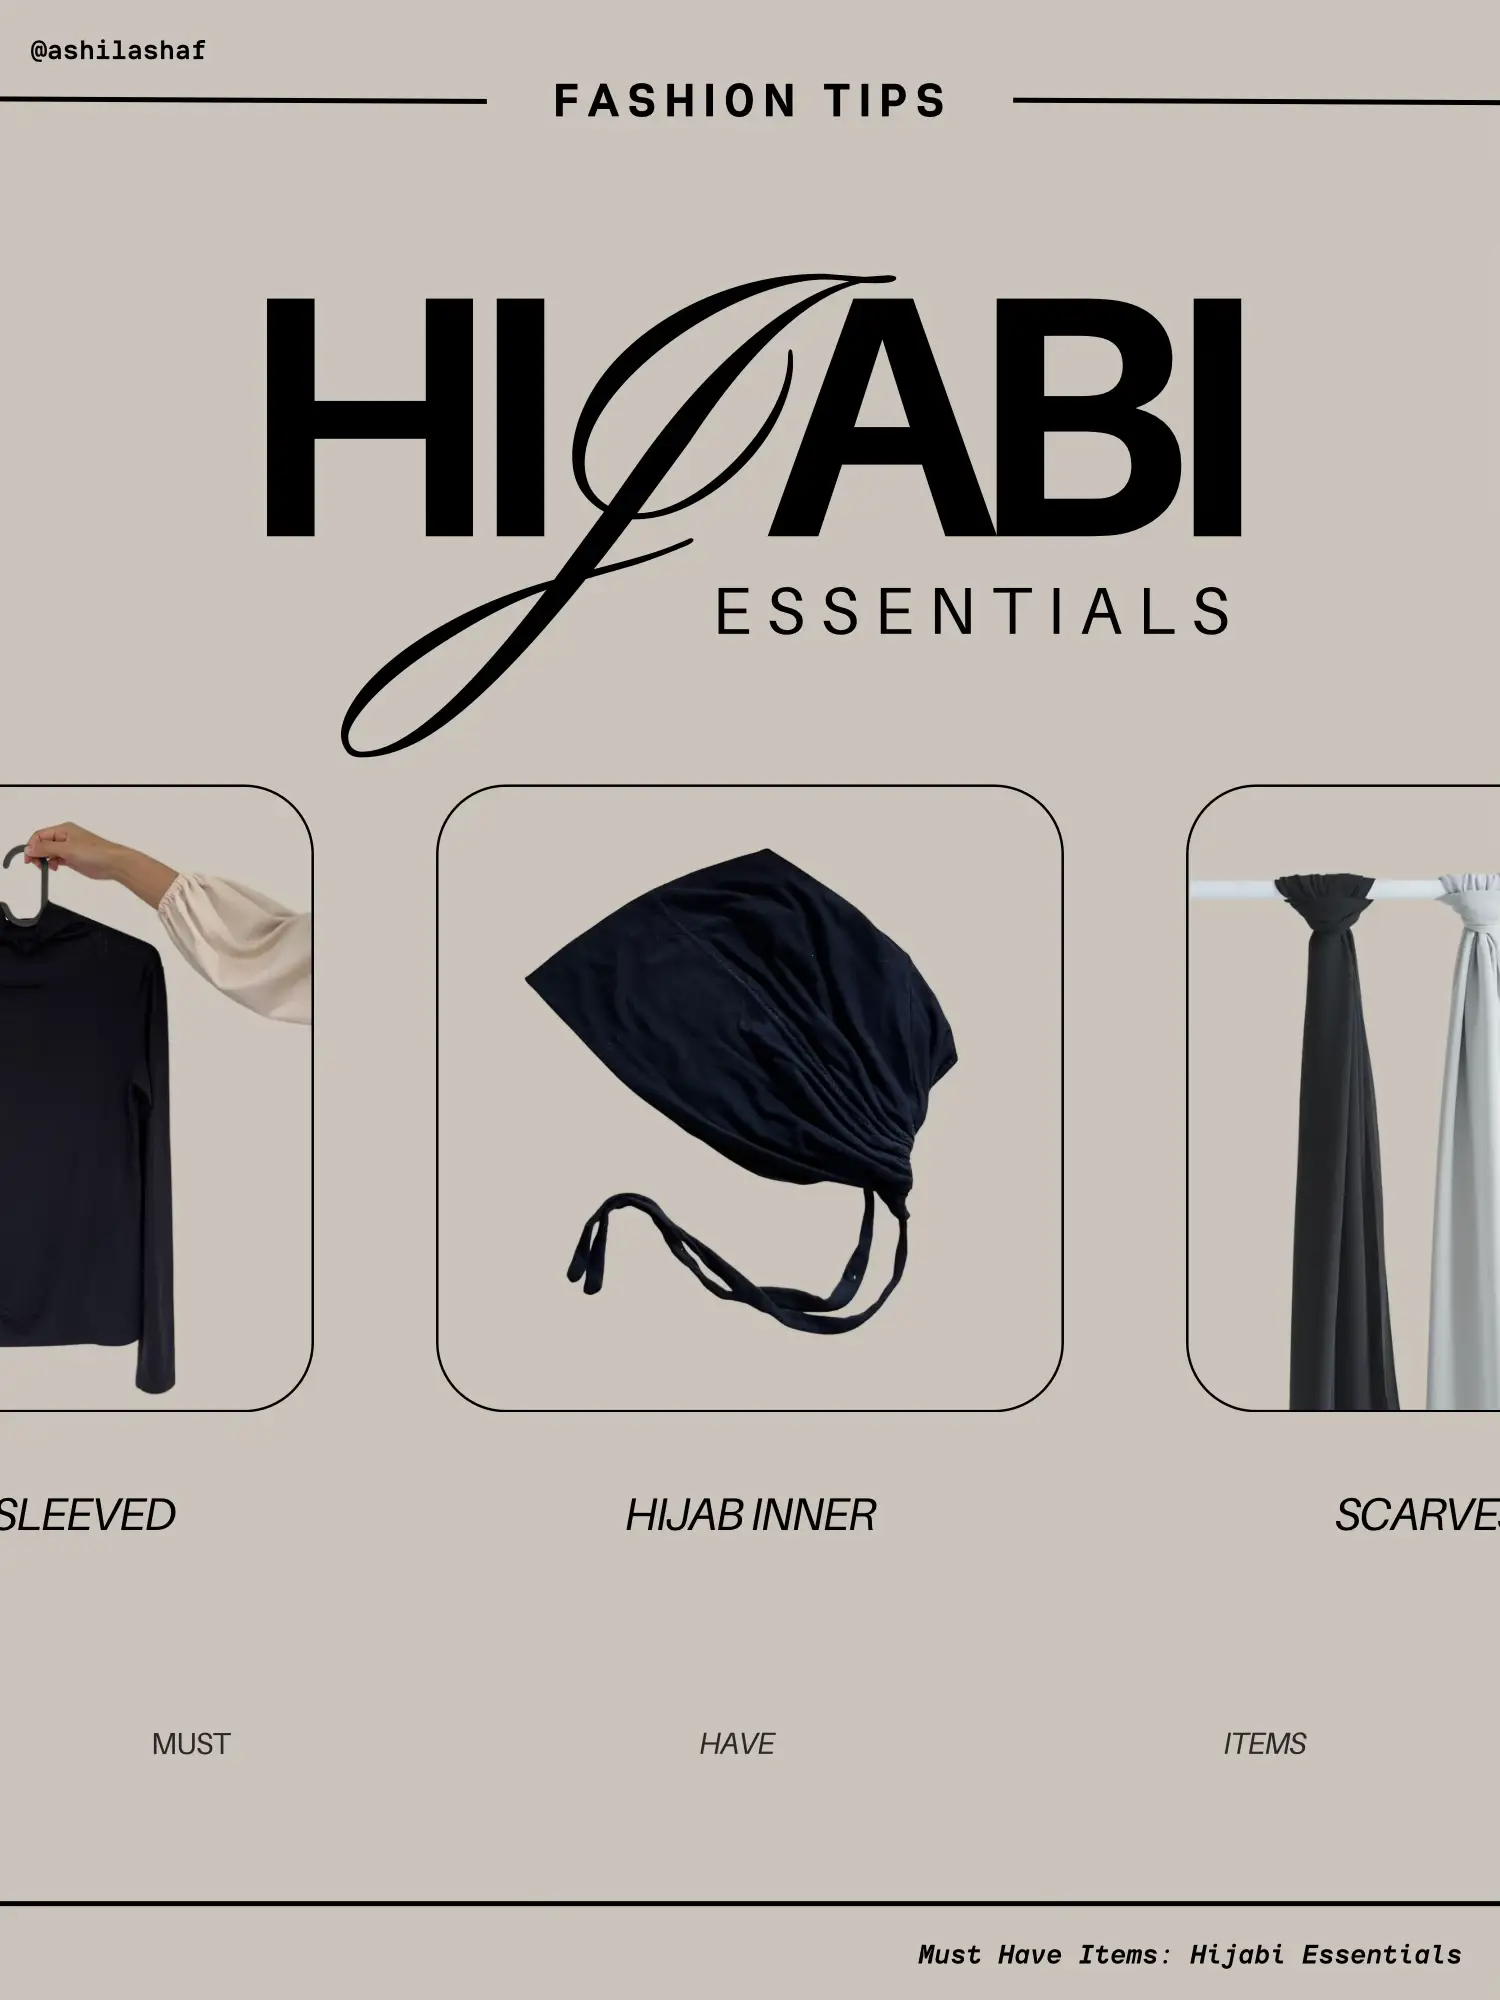 6 Must Haves Hijab Essentials How to choose right hijab material,Inner  caps,accessories & organizer 